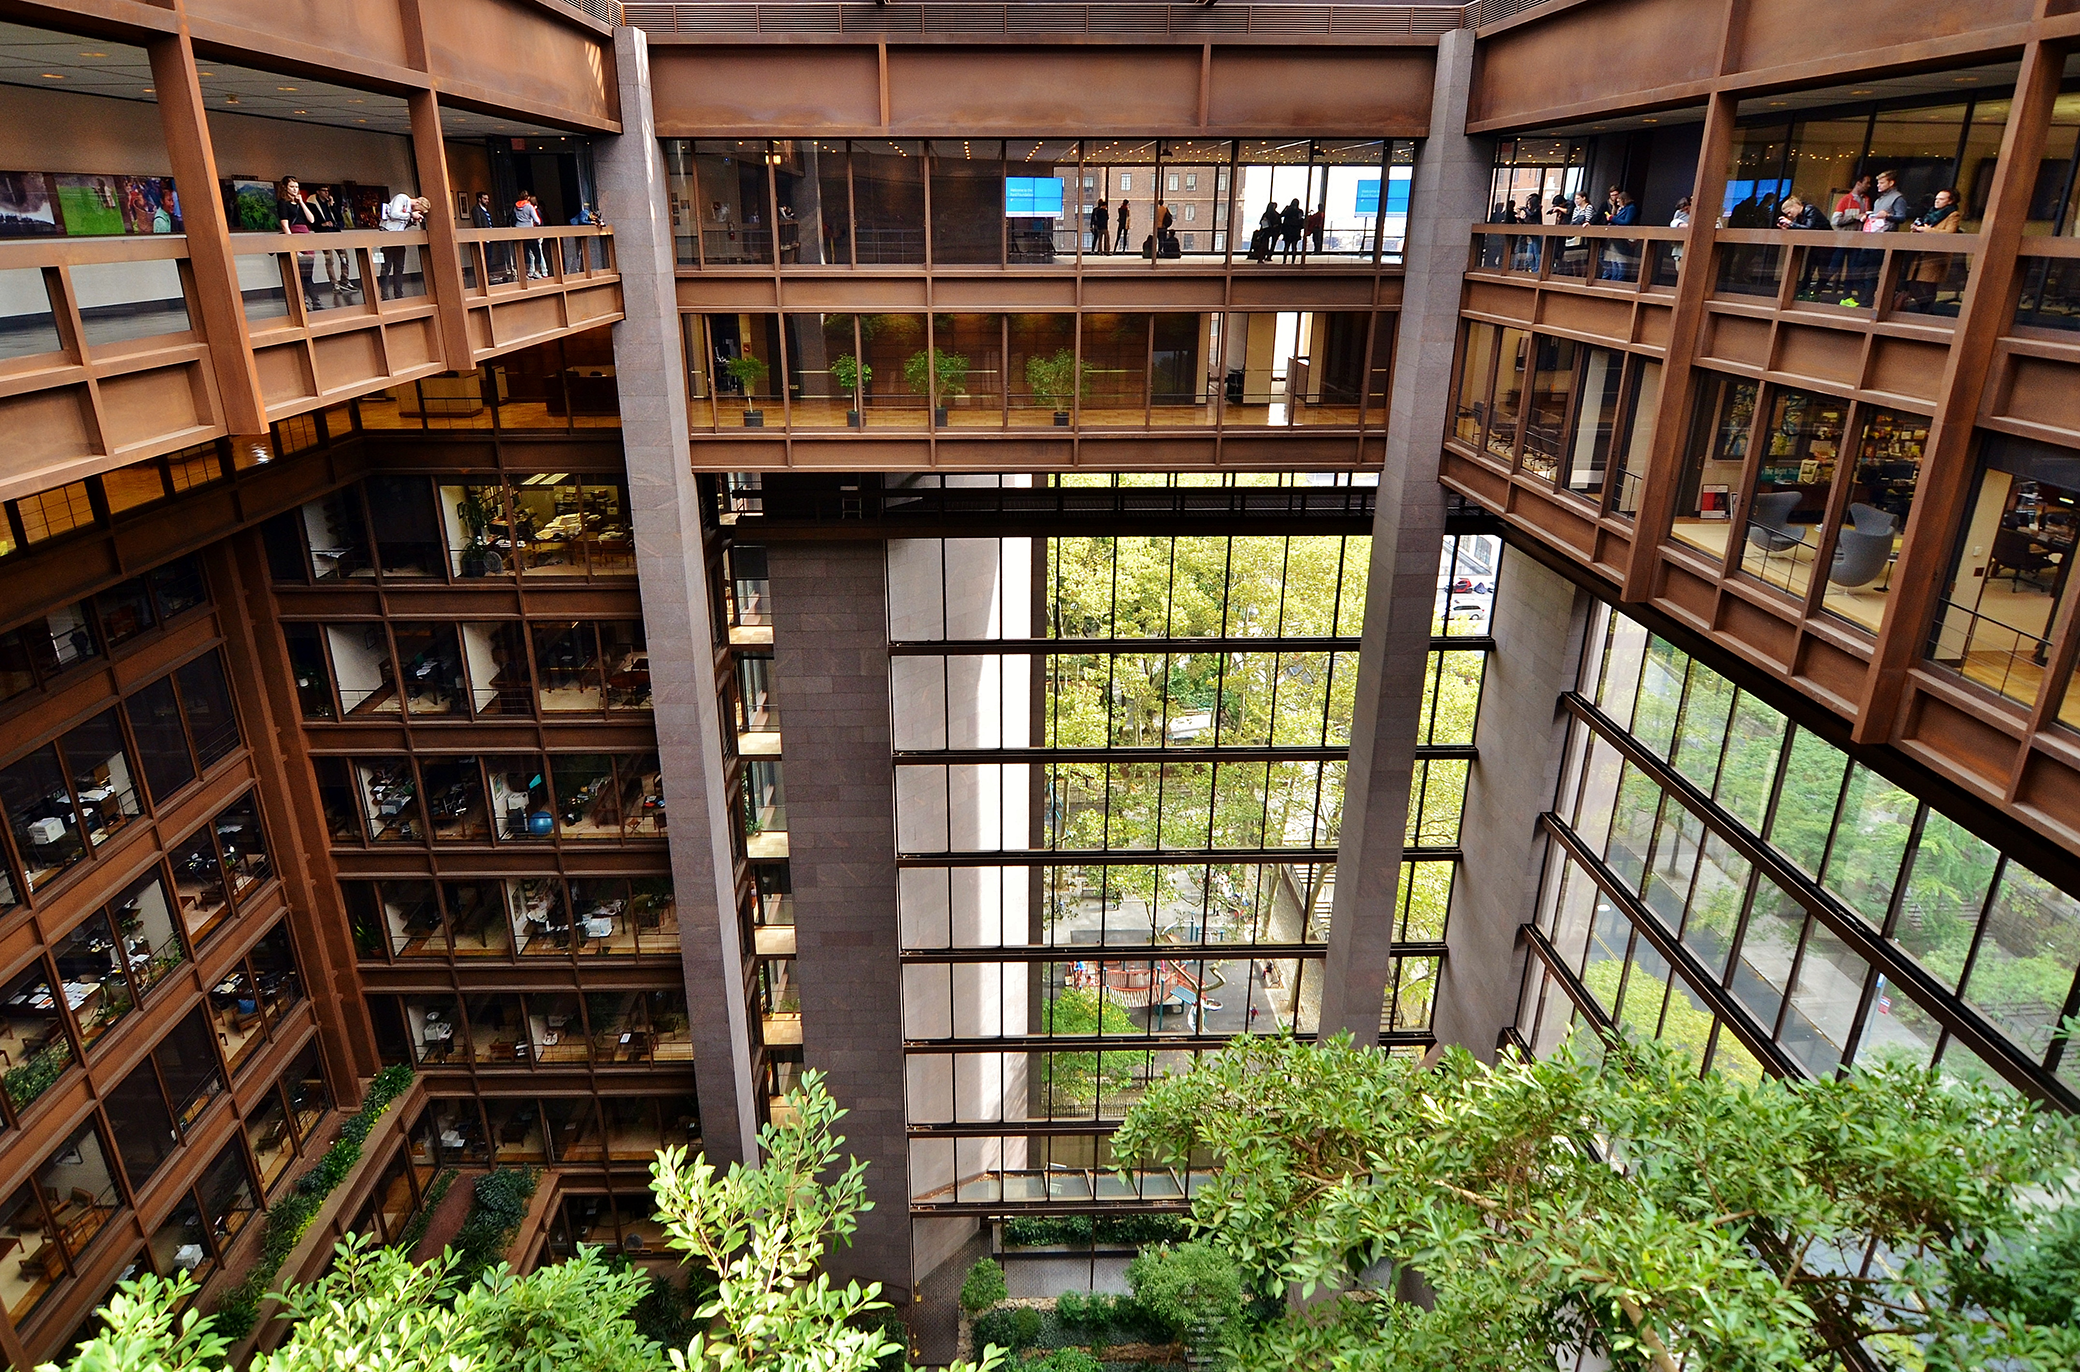 Inside the Ford Foundation Building in midtown Manhattan, 2015. Photograph by Gigi Altarejos.